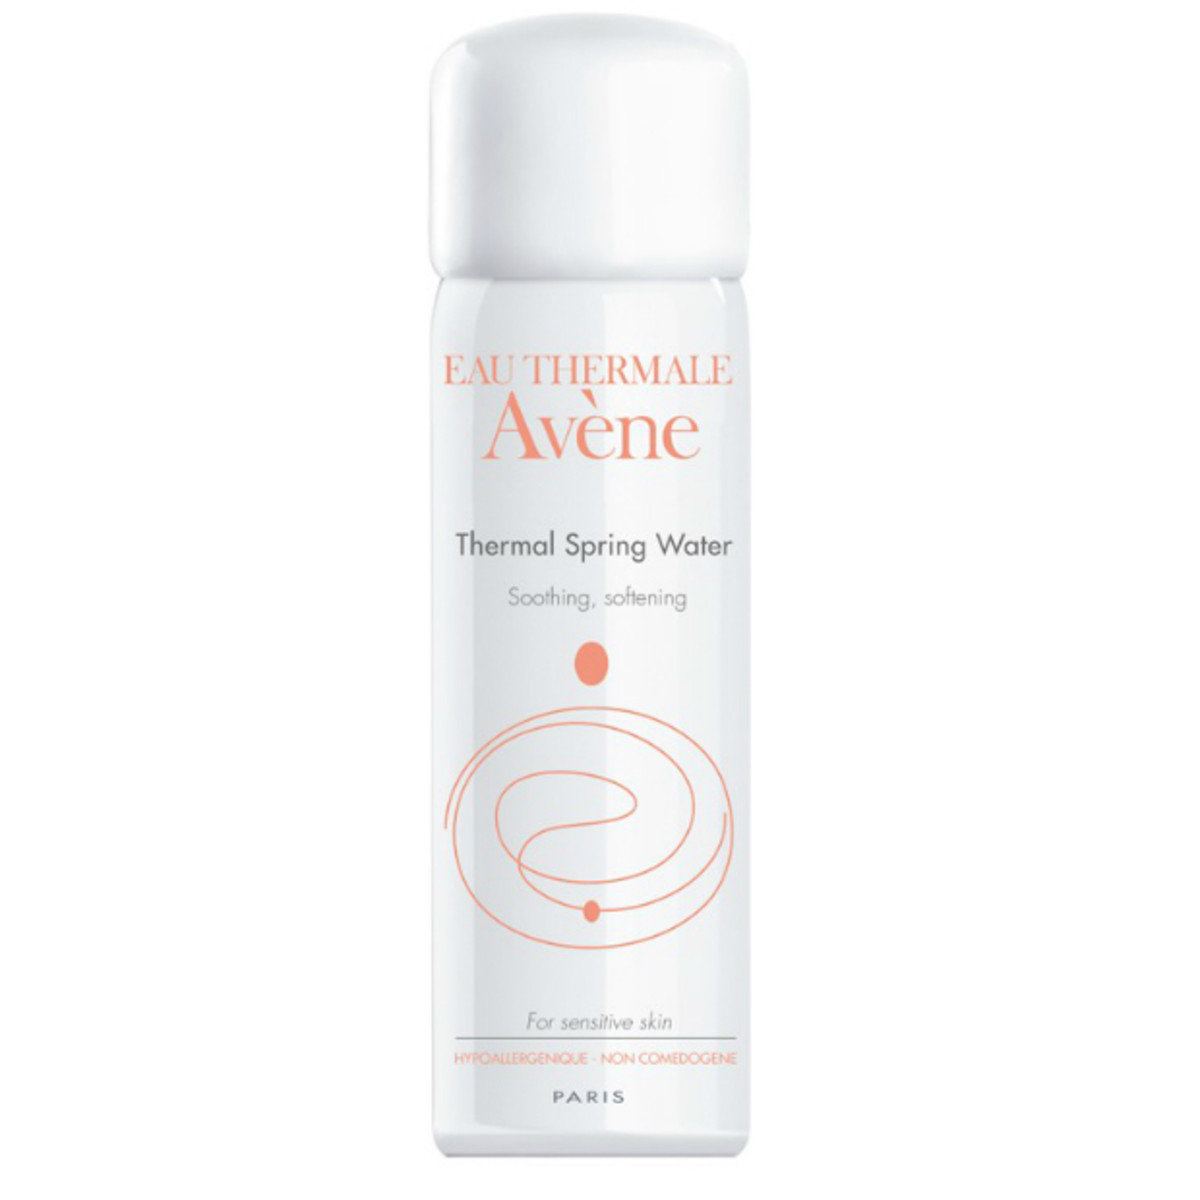 Avene Thermal Spring Water, $18.50, available at Drugstore.com.